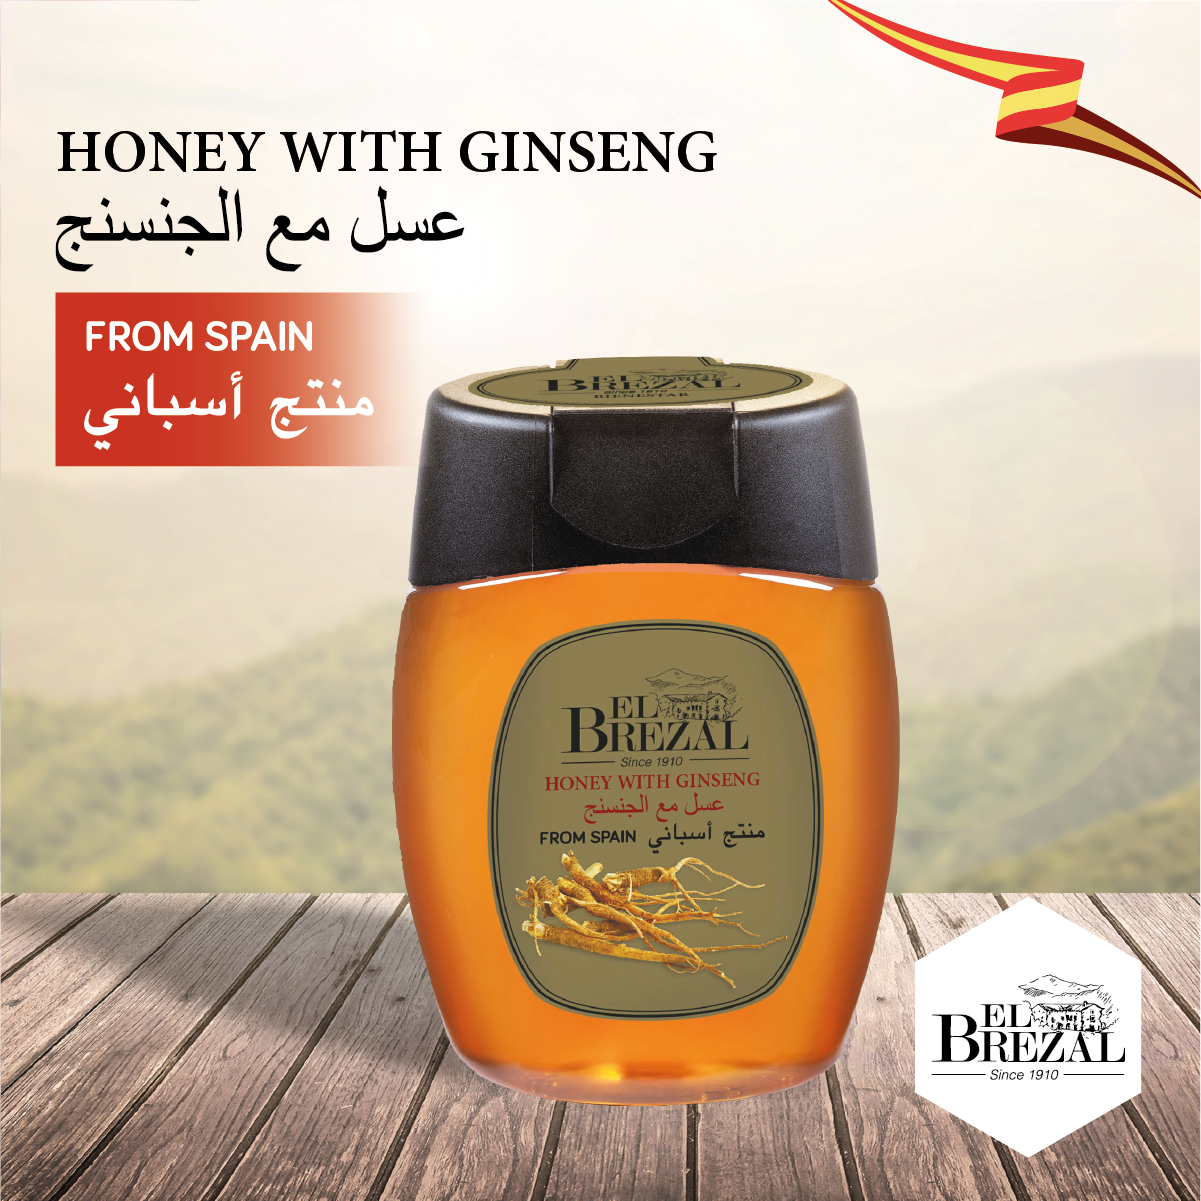 HONEY MIXED WITH GINSENG